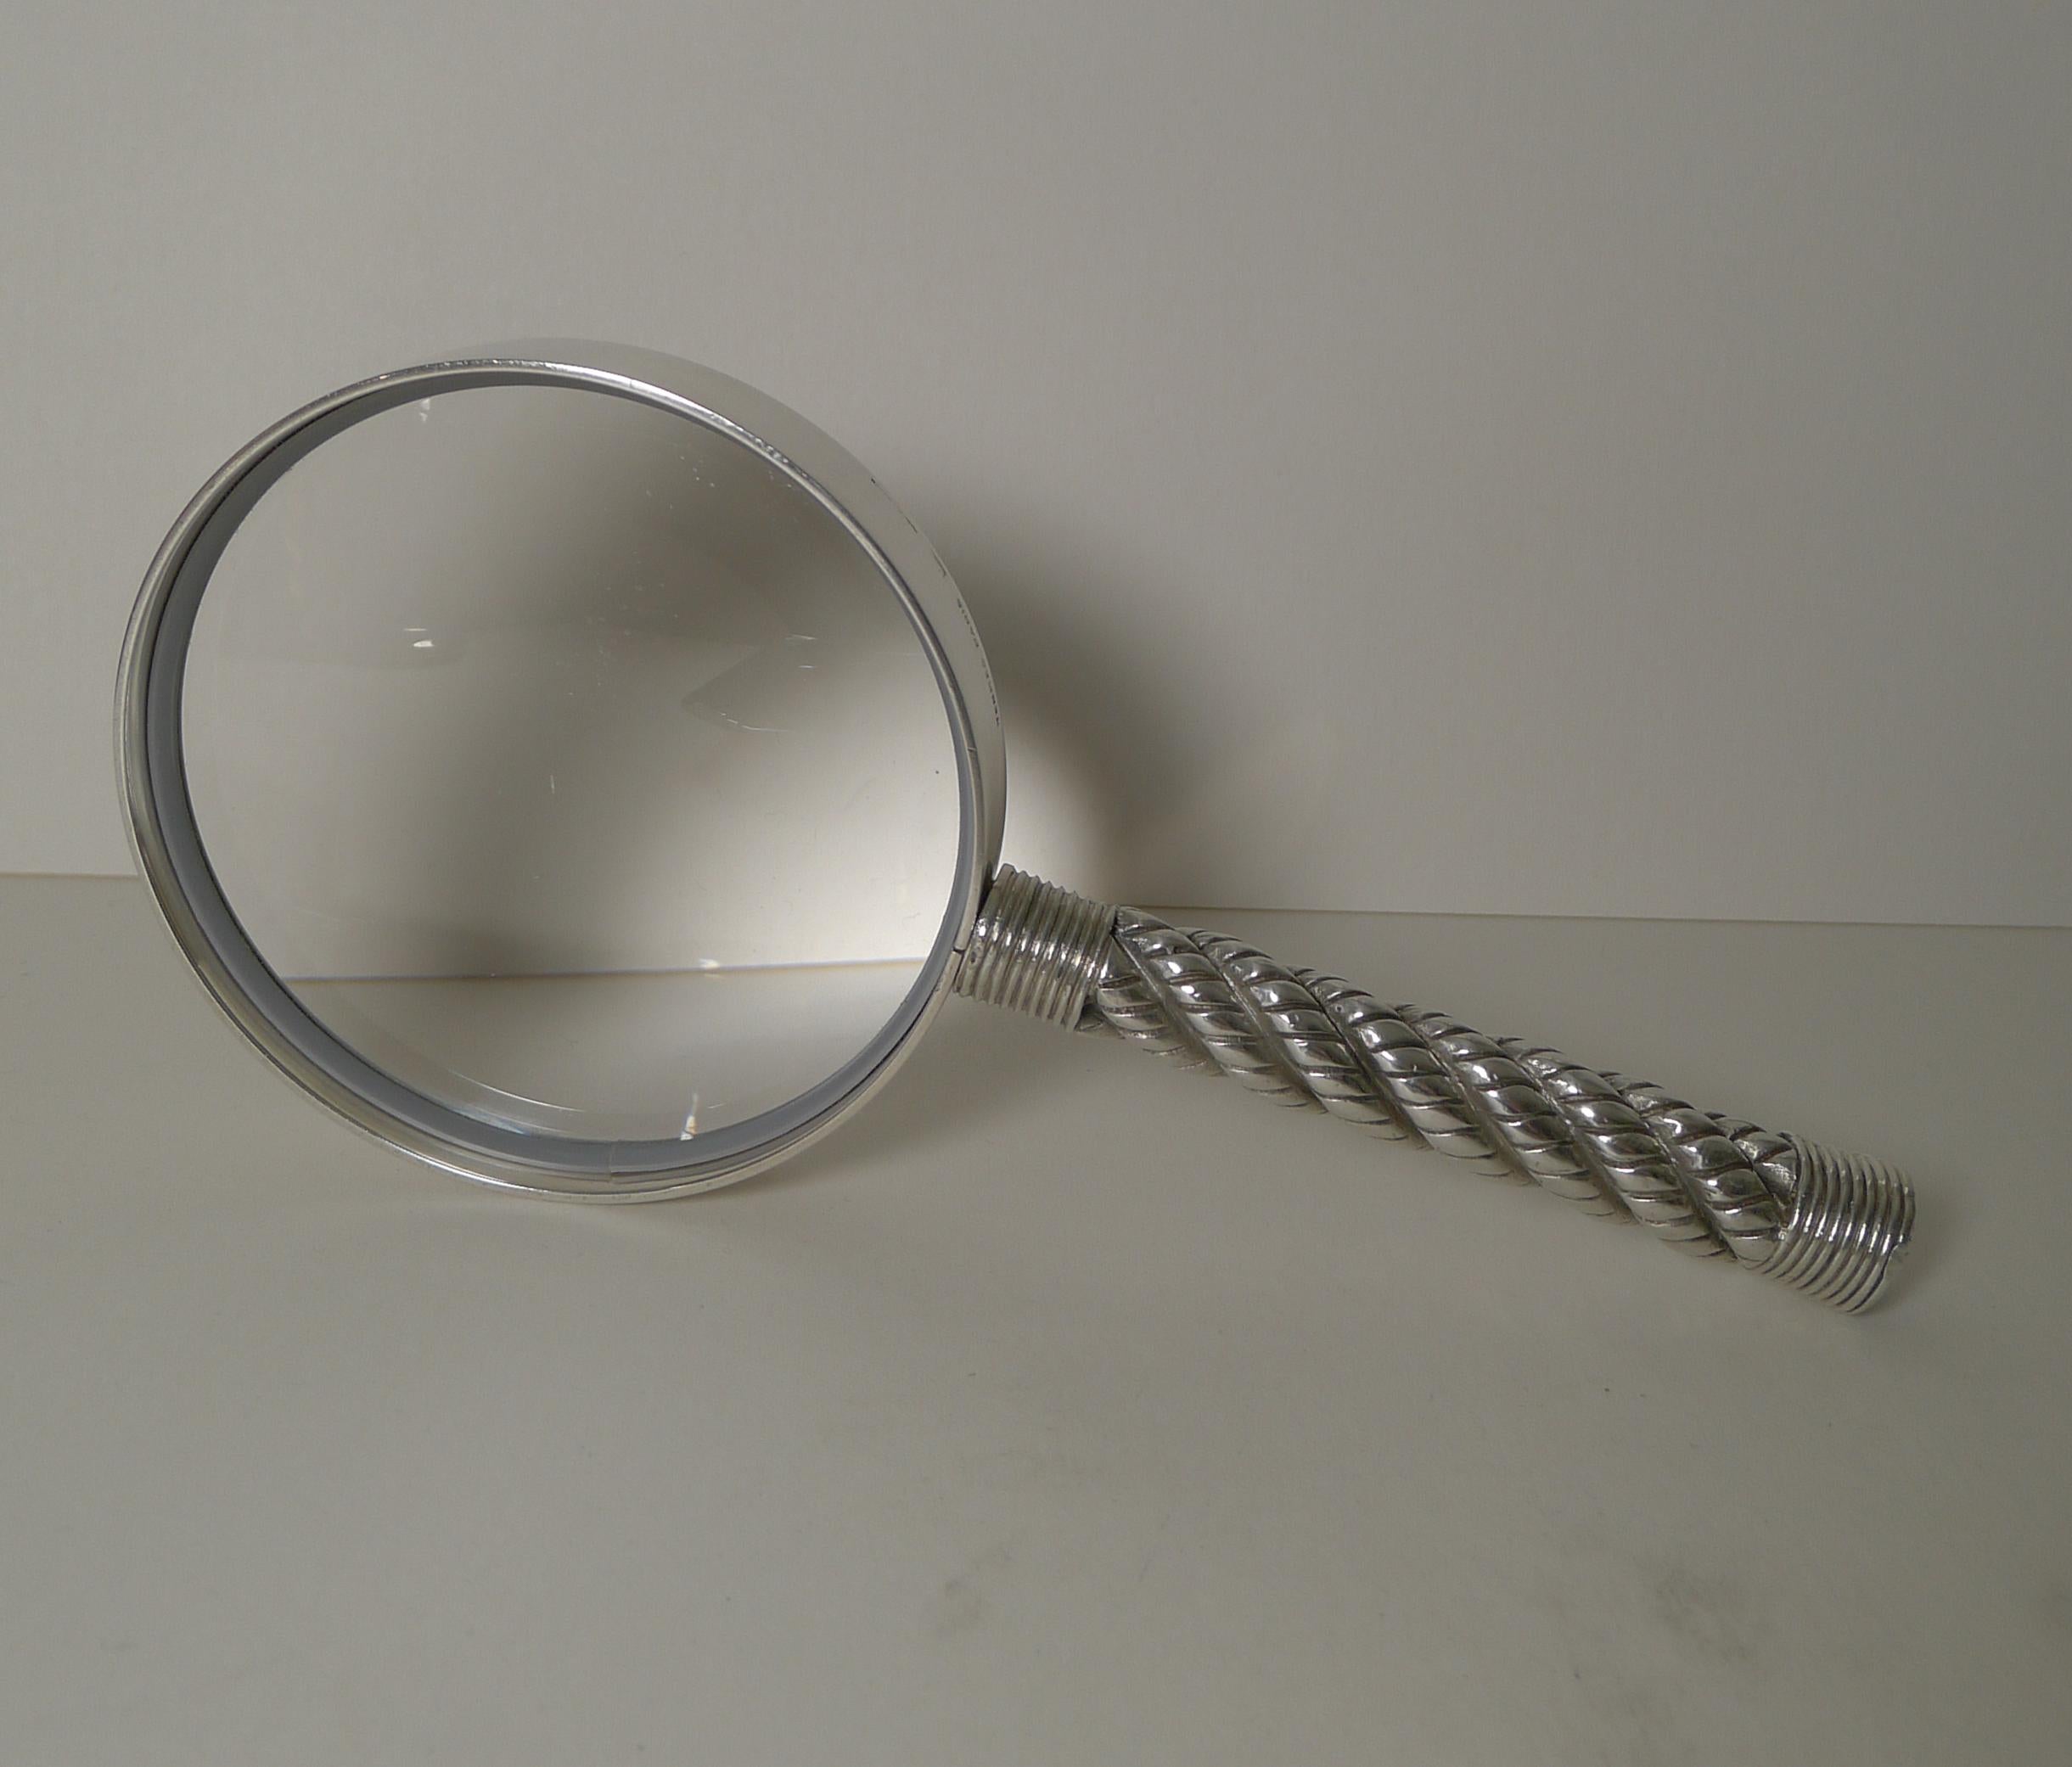 A fabulous vintage French silver plated magnifier created c.1960's for the 